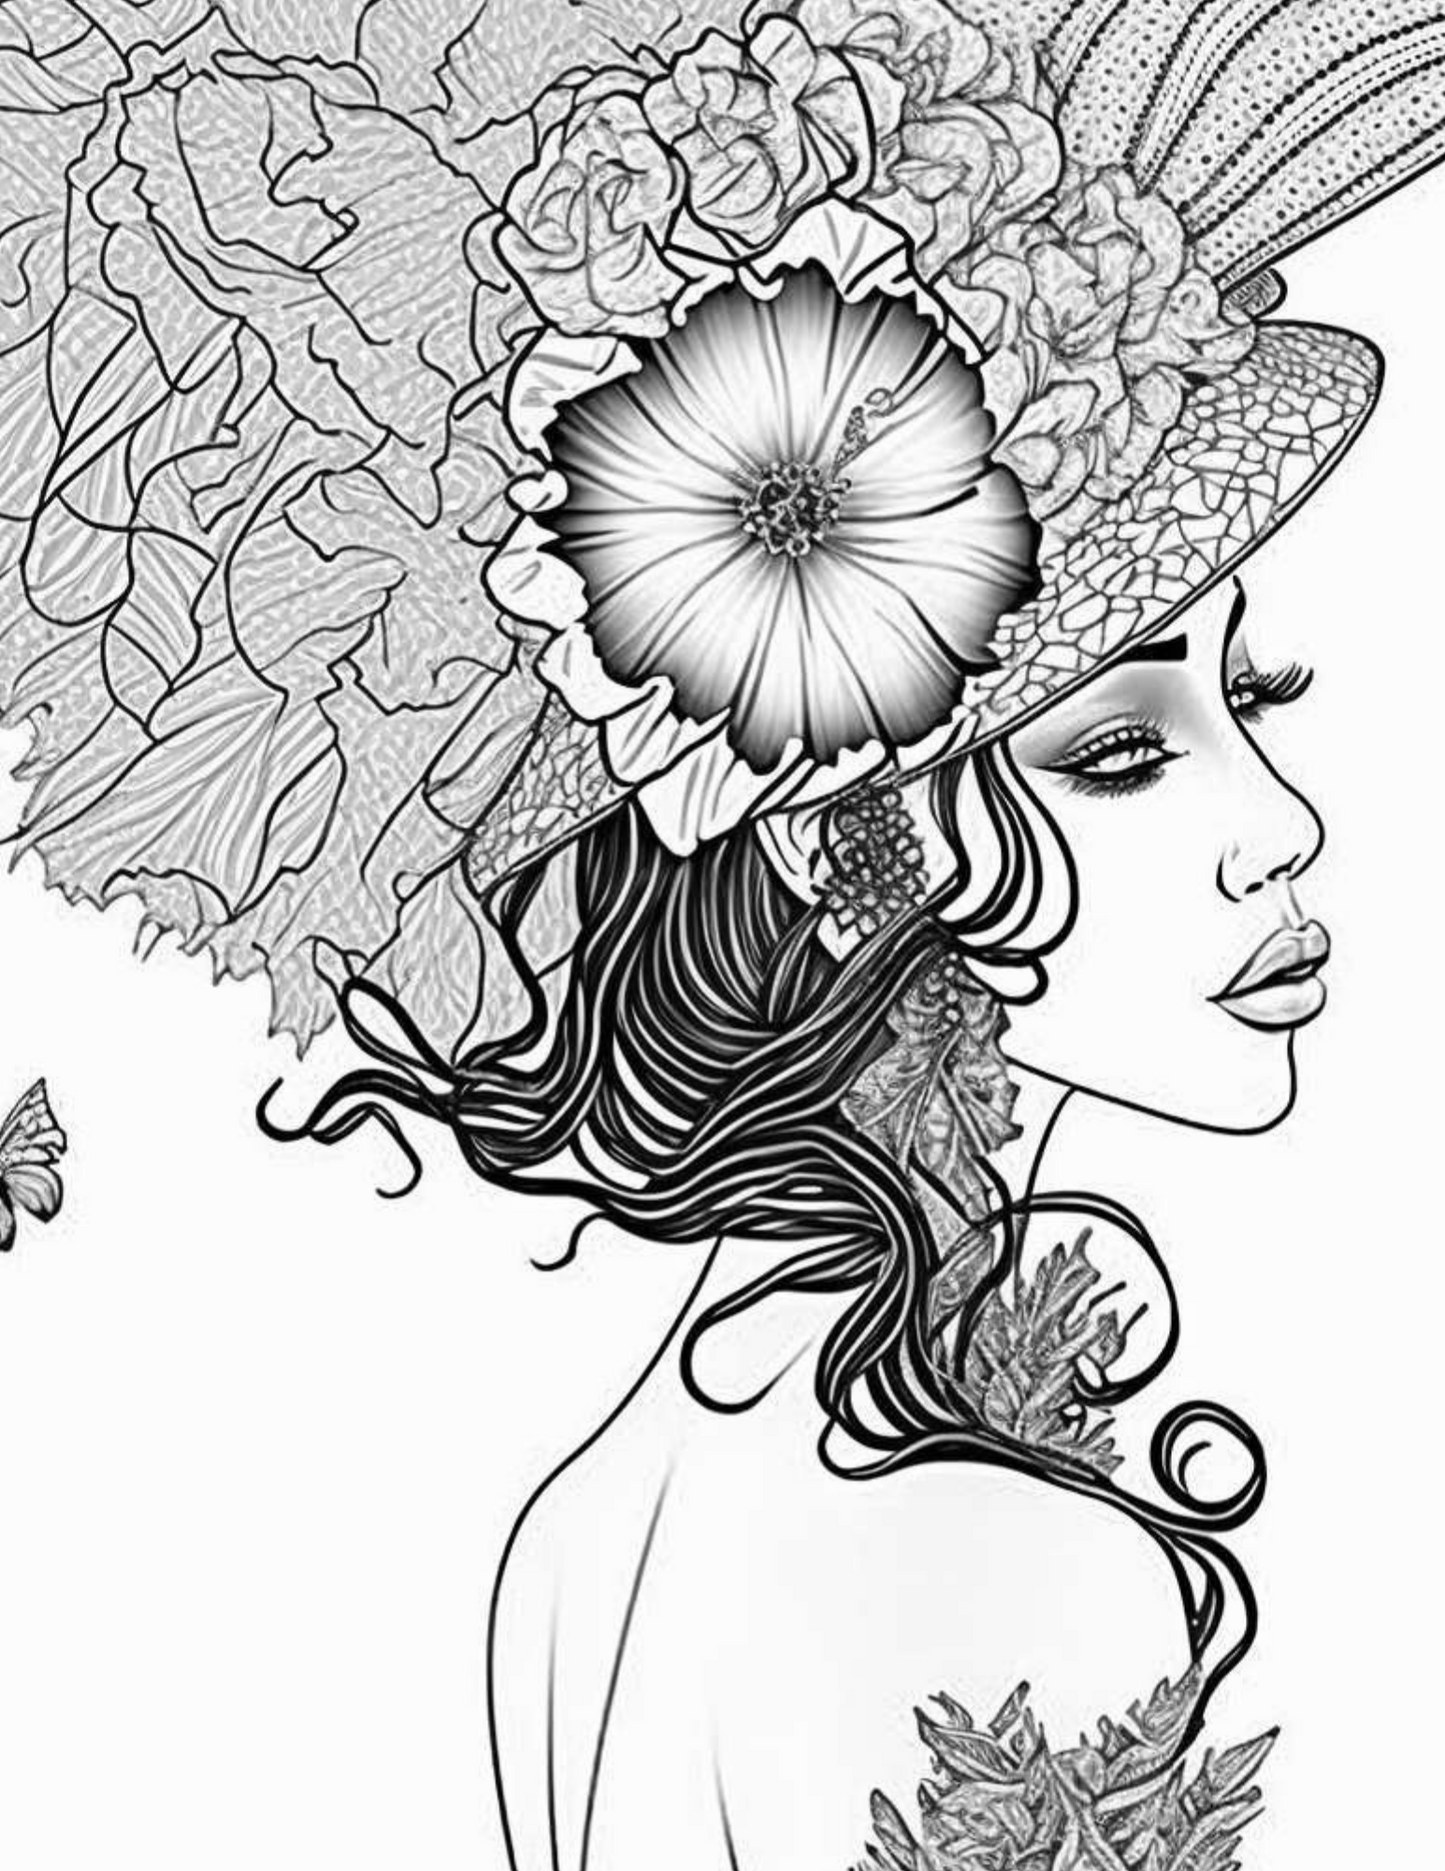 The black queen coloring book cause less stress is best!